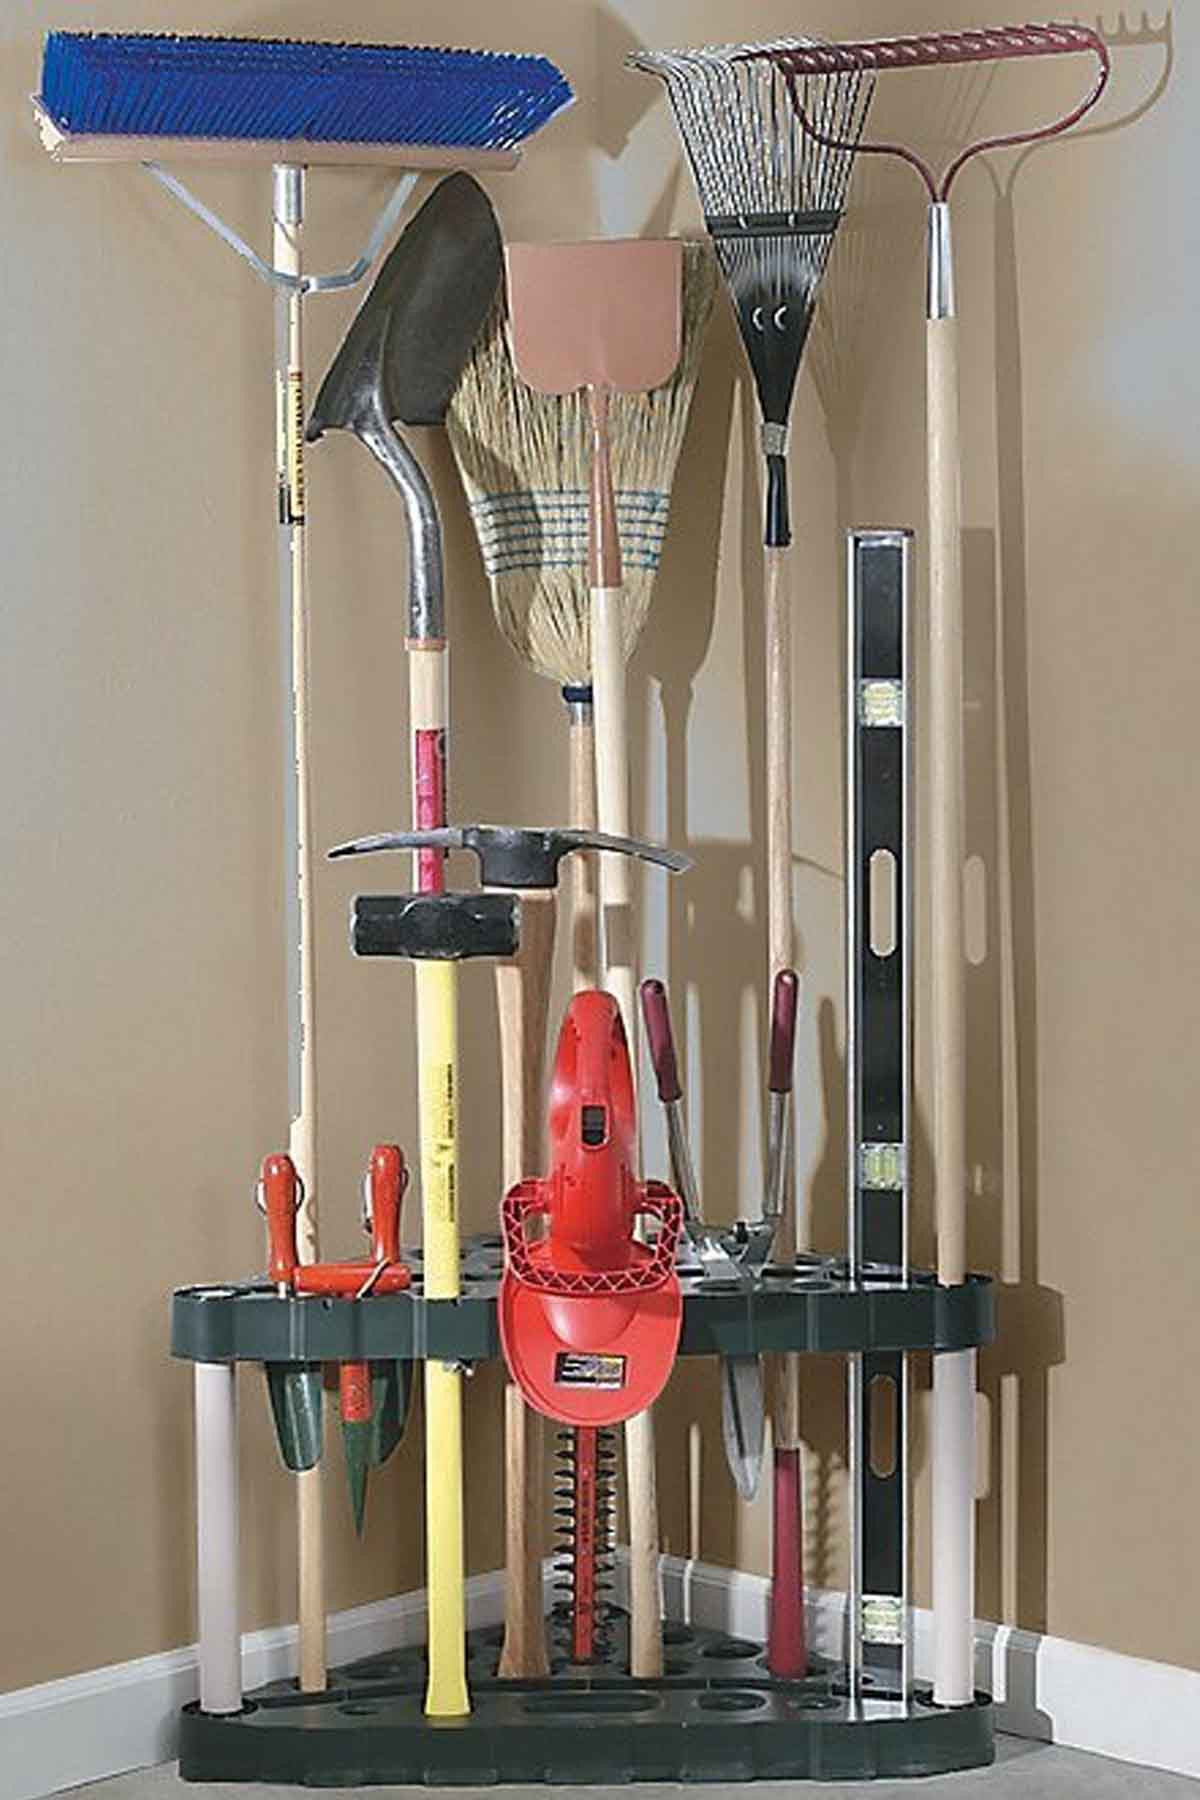 Garage Organization Ideas
 24 Garage Organization Ideas Storage Solutions and Tips